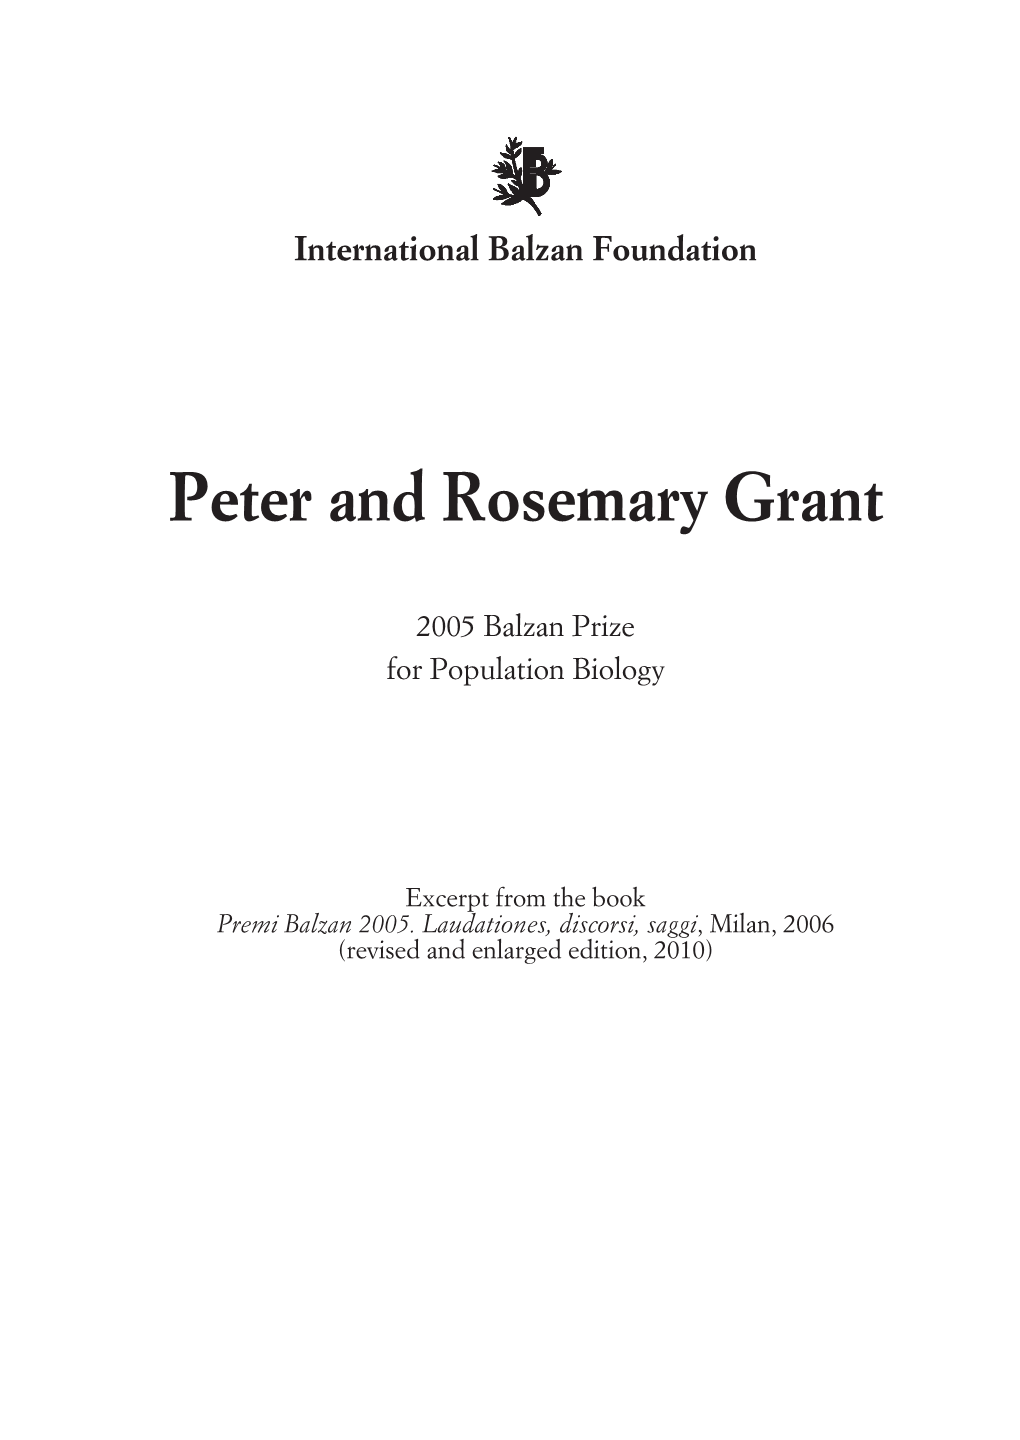 Peter and Rosemary Grant